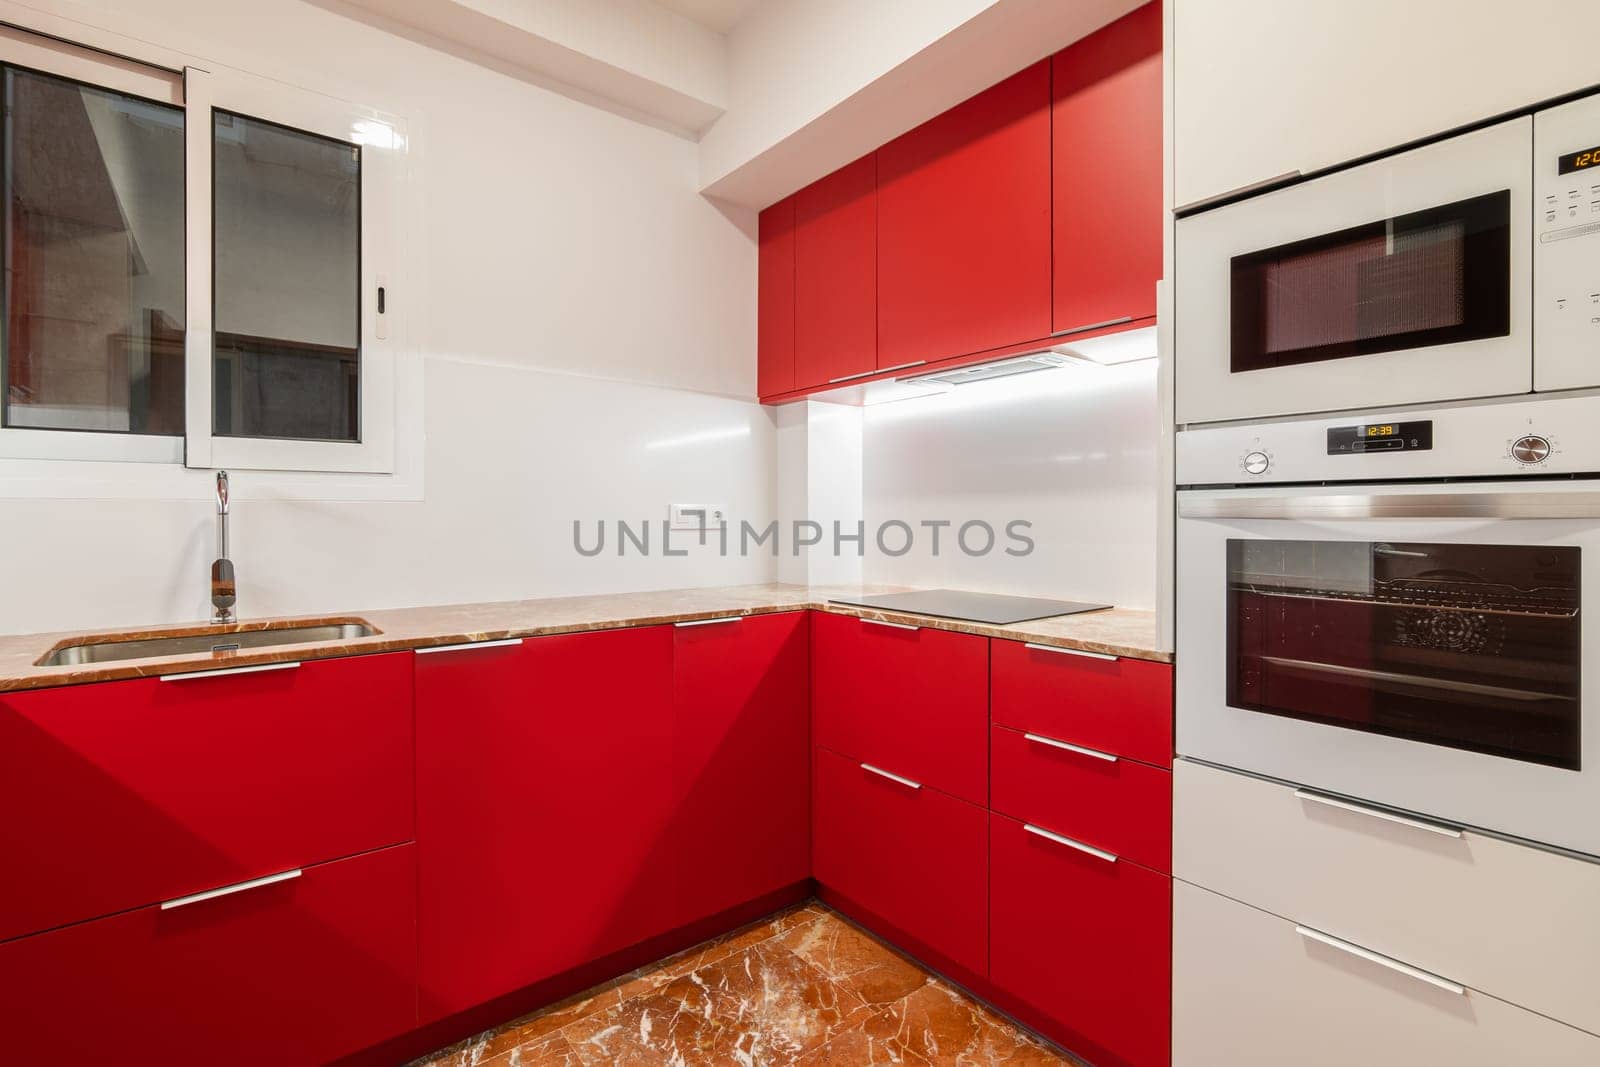 A modern kitchen with stylish red cabinetry and white appliances.